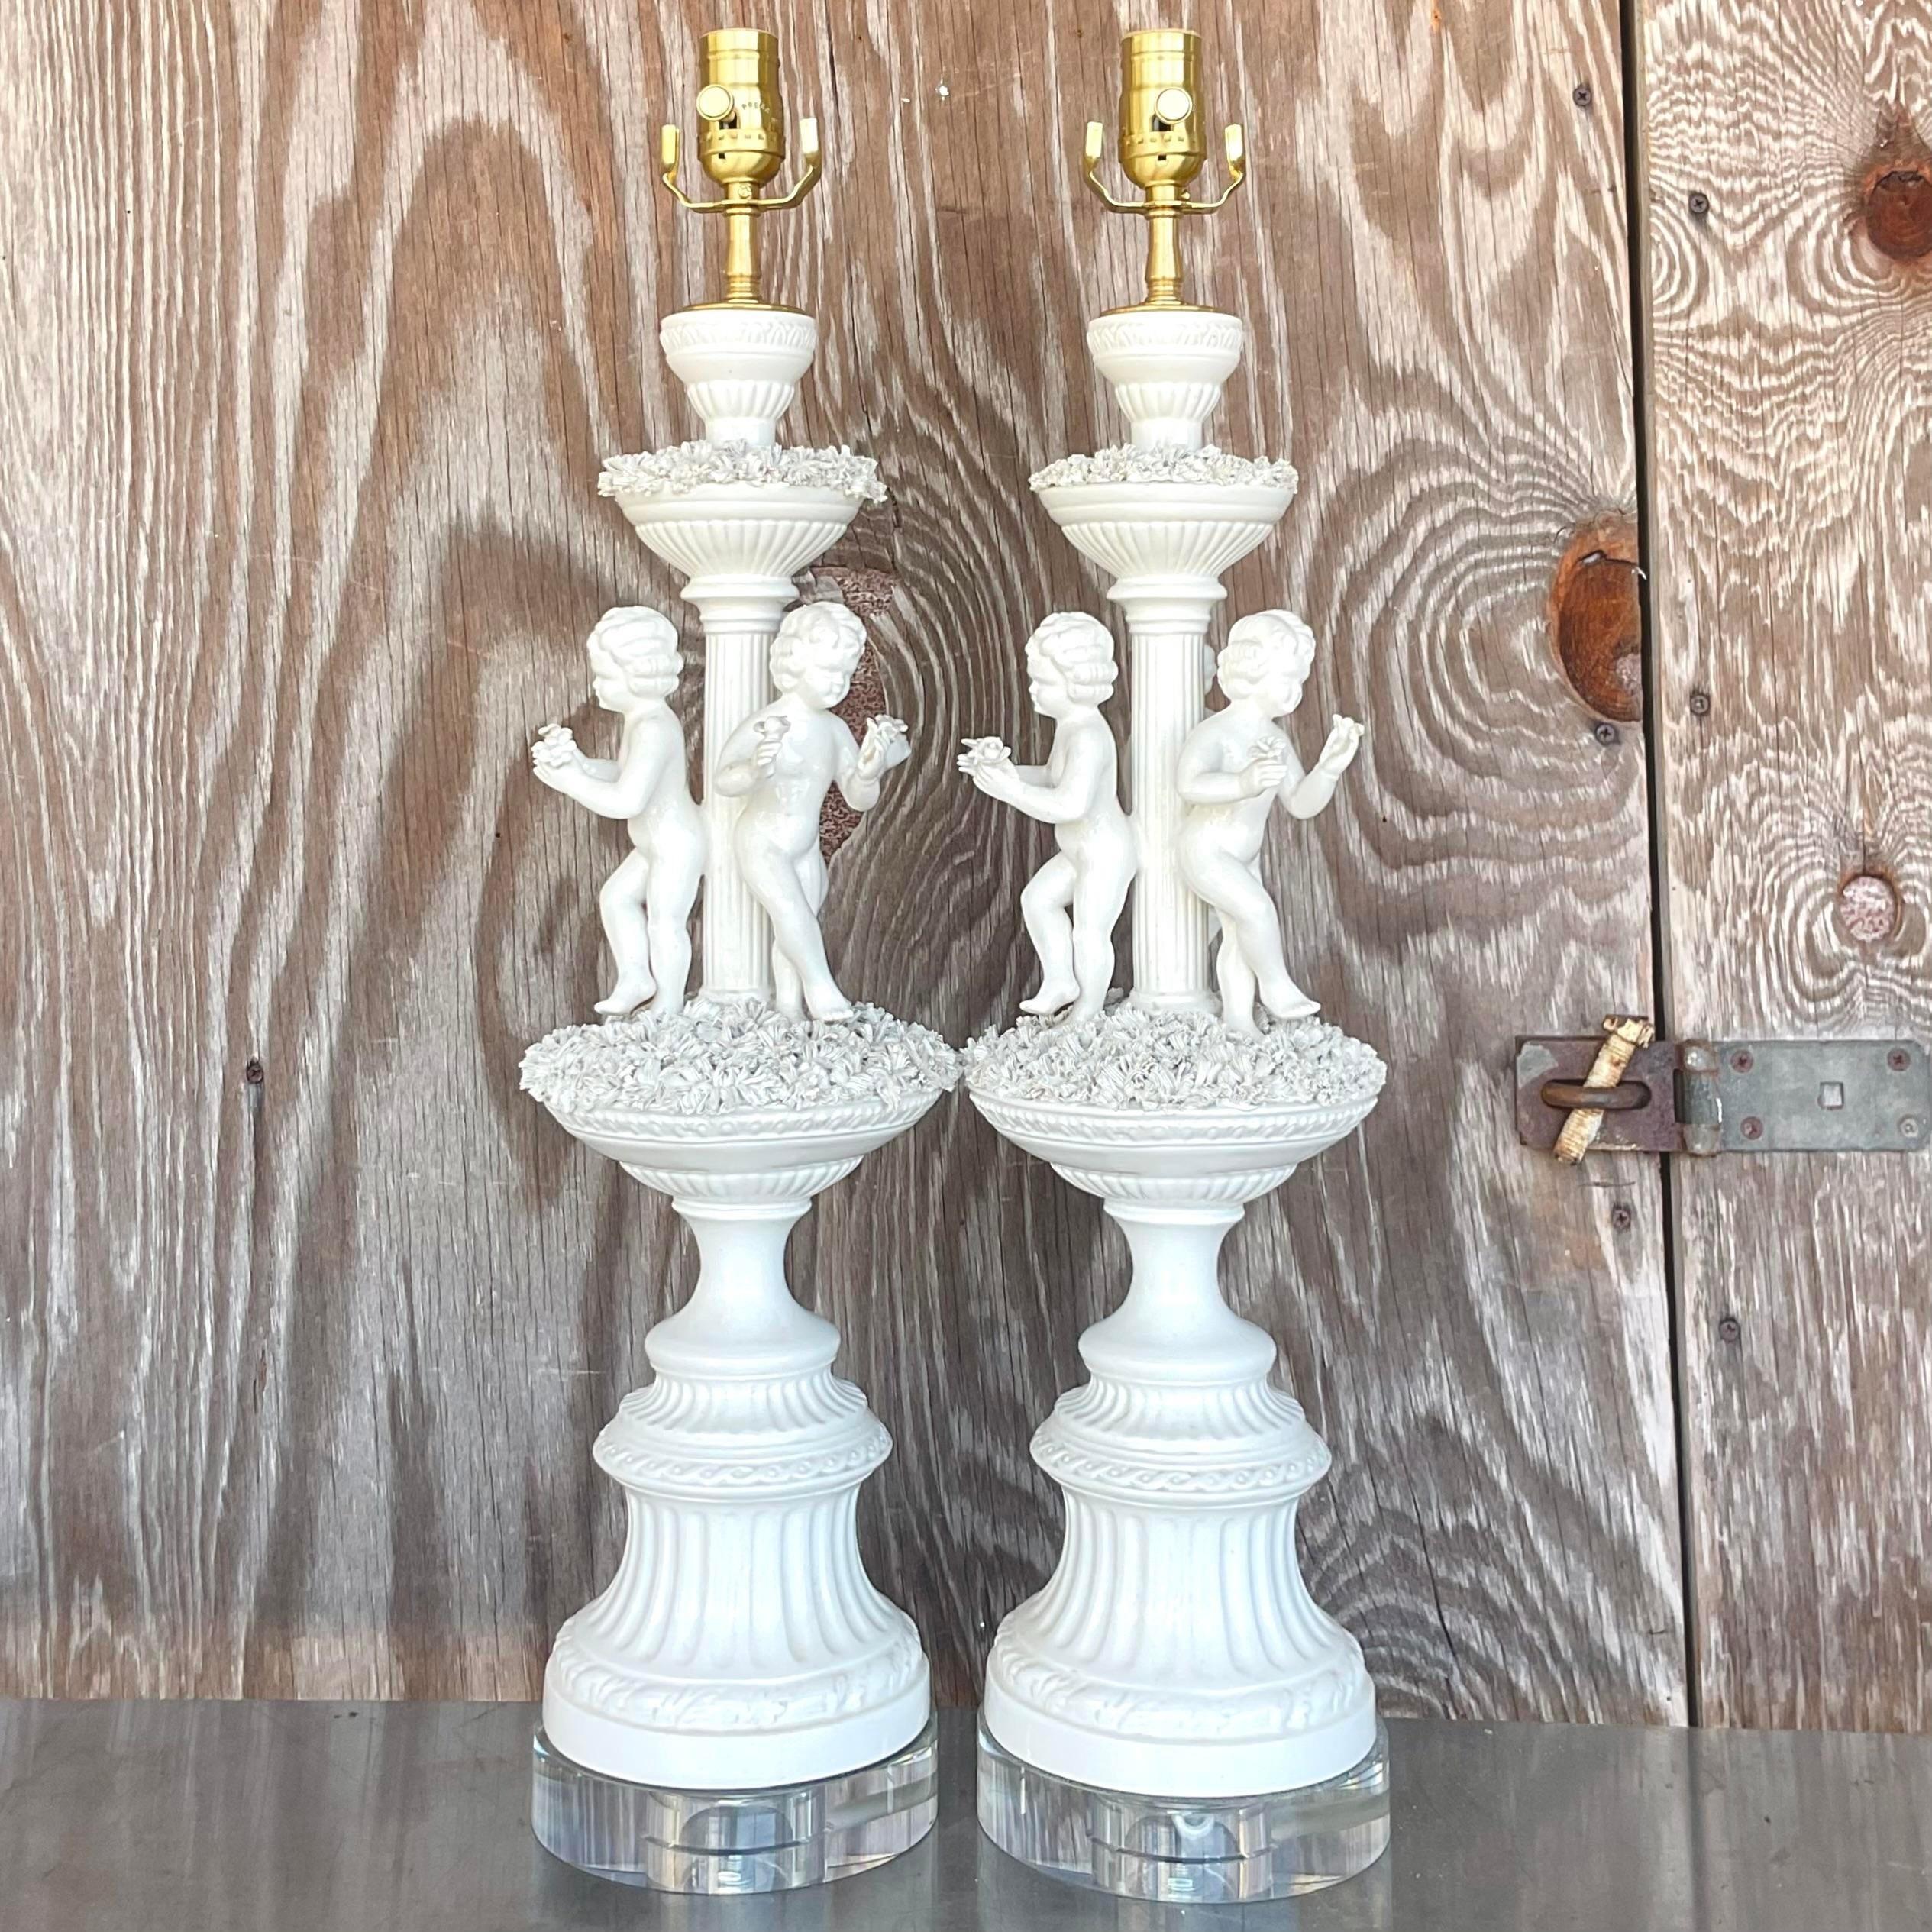 American Vintage Regency Glazed Ceramic Putti Style Lamps - a Pair For Sale